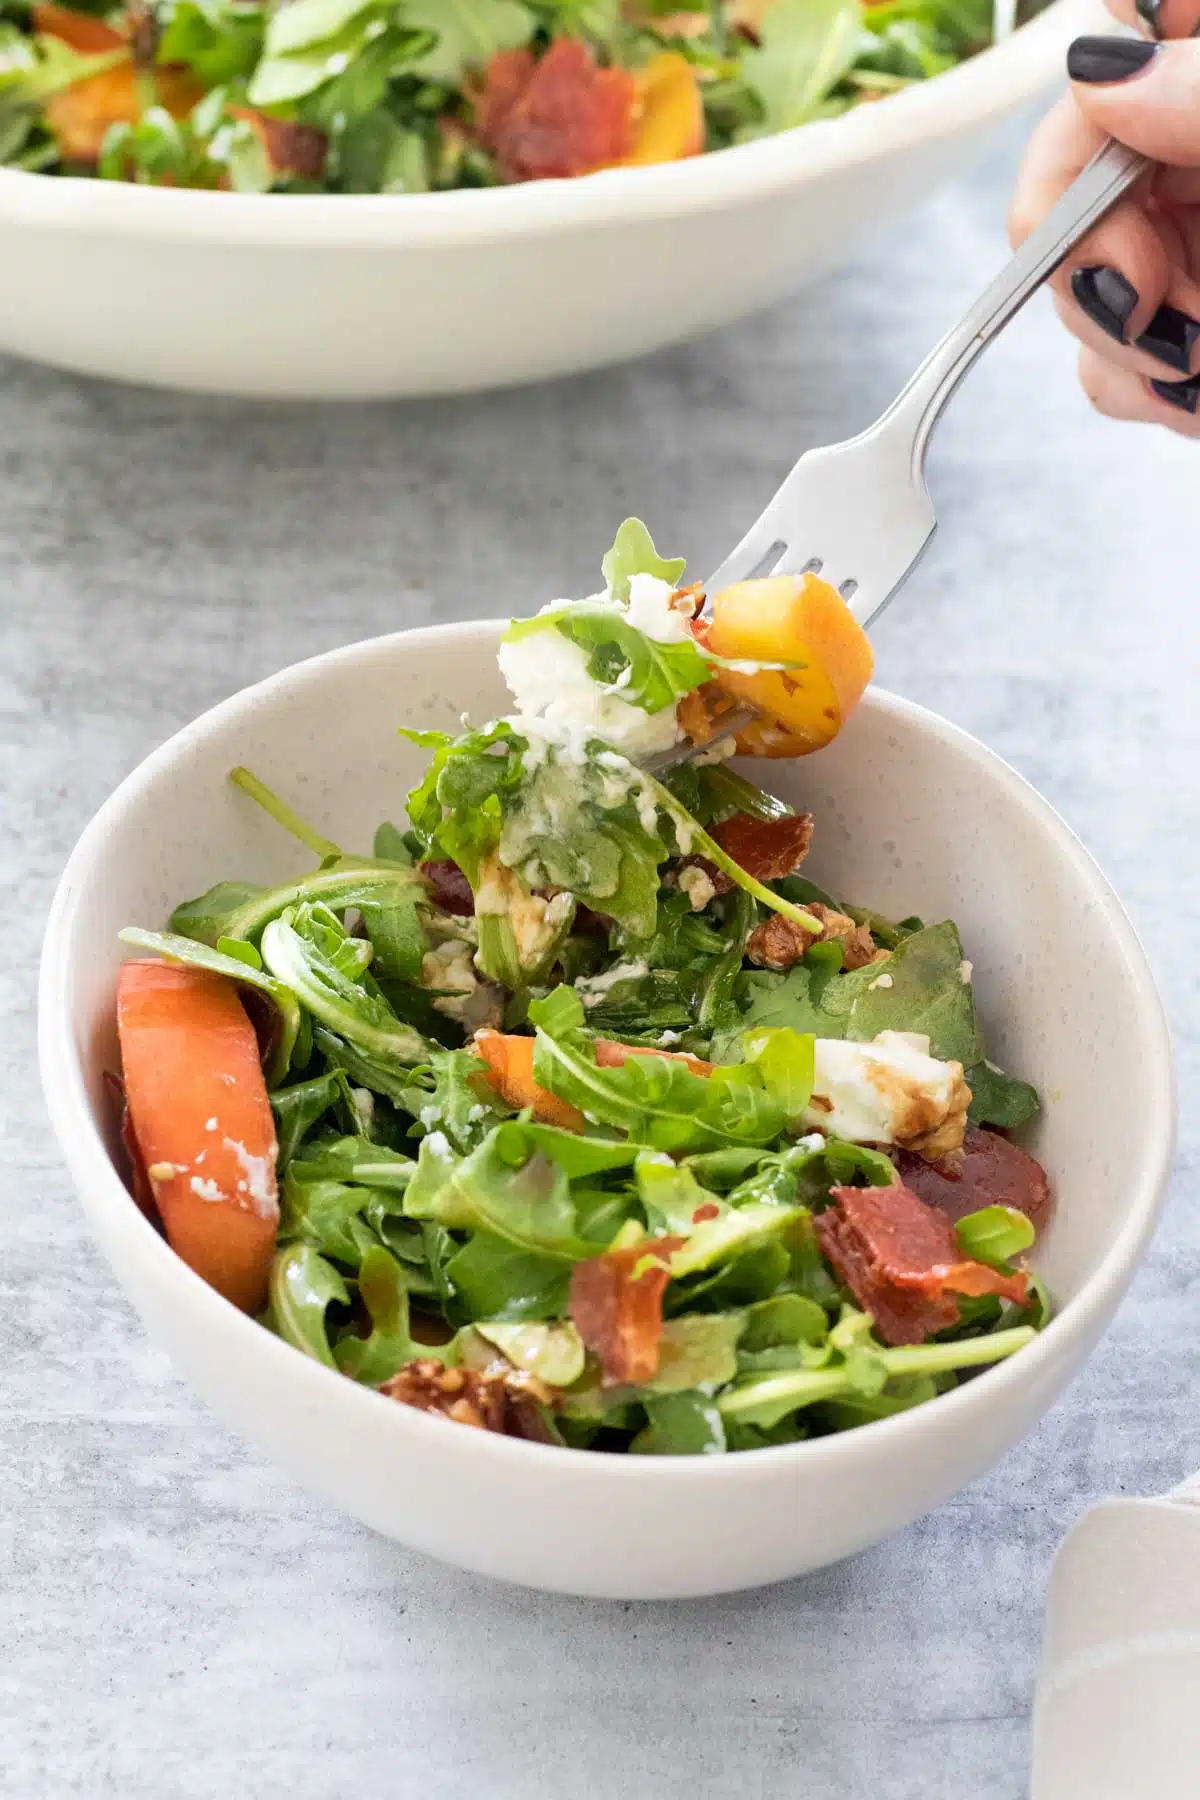 A white hand with black nail polish has a forkful of salad hovering above a small bowl. The larger bowl of peach arugula salad sits in the background.